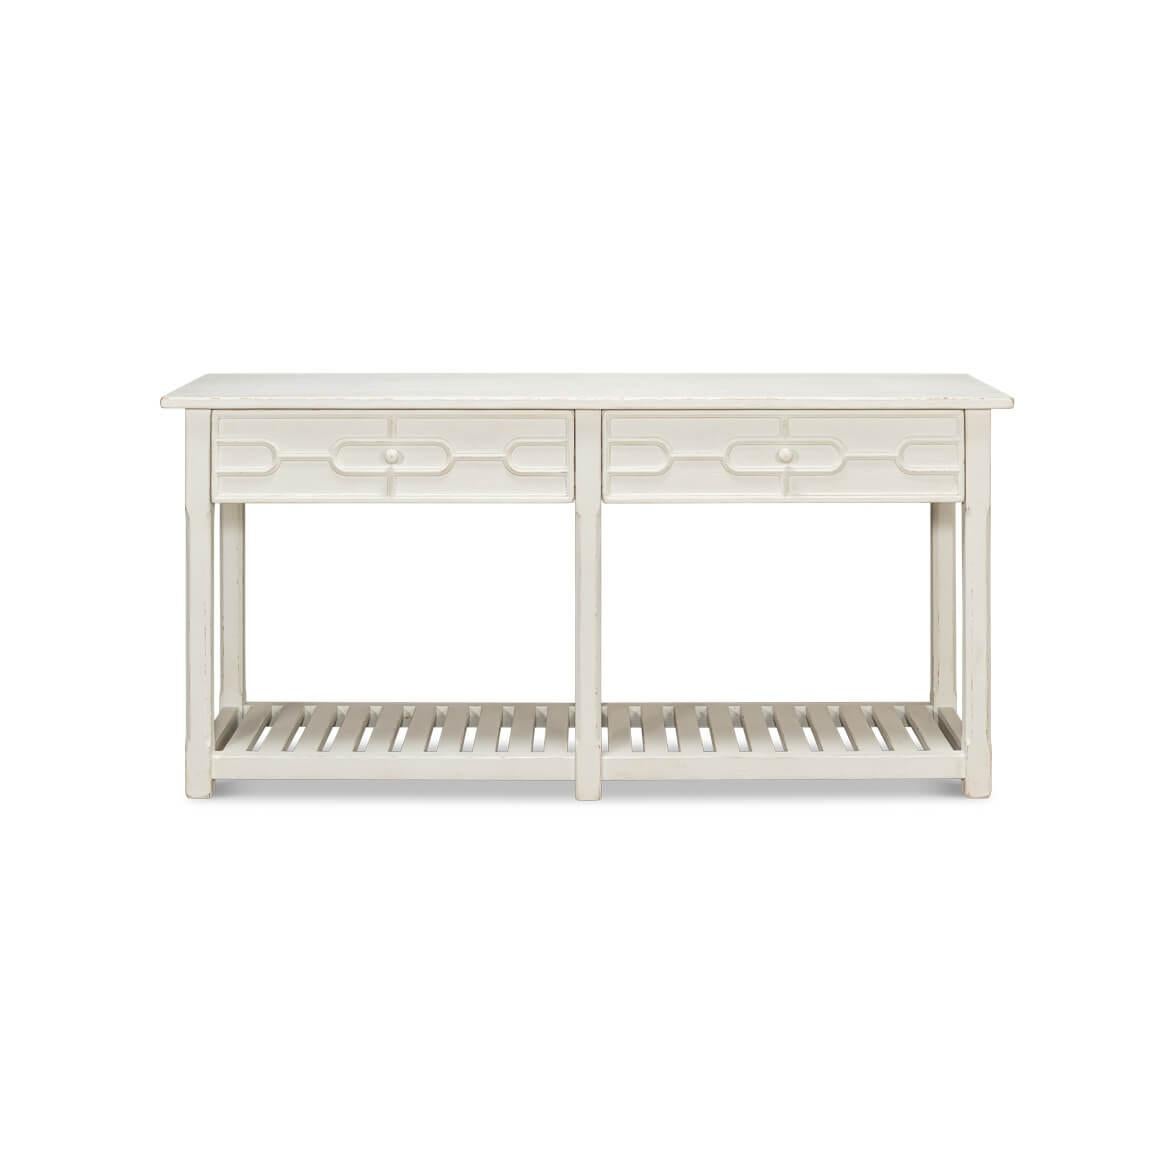 Painted Console Table featuring a rustic country distressed antique white painted finish. It boasts a rectangular top above two wide drawers adorned with blind fret trellis form decoration. The table is raised on six legs with a slatted shelf